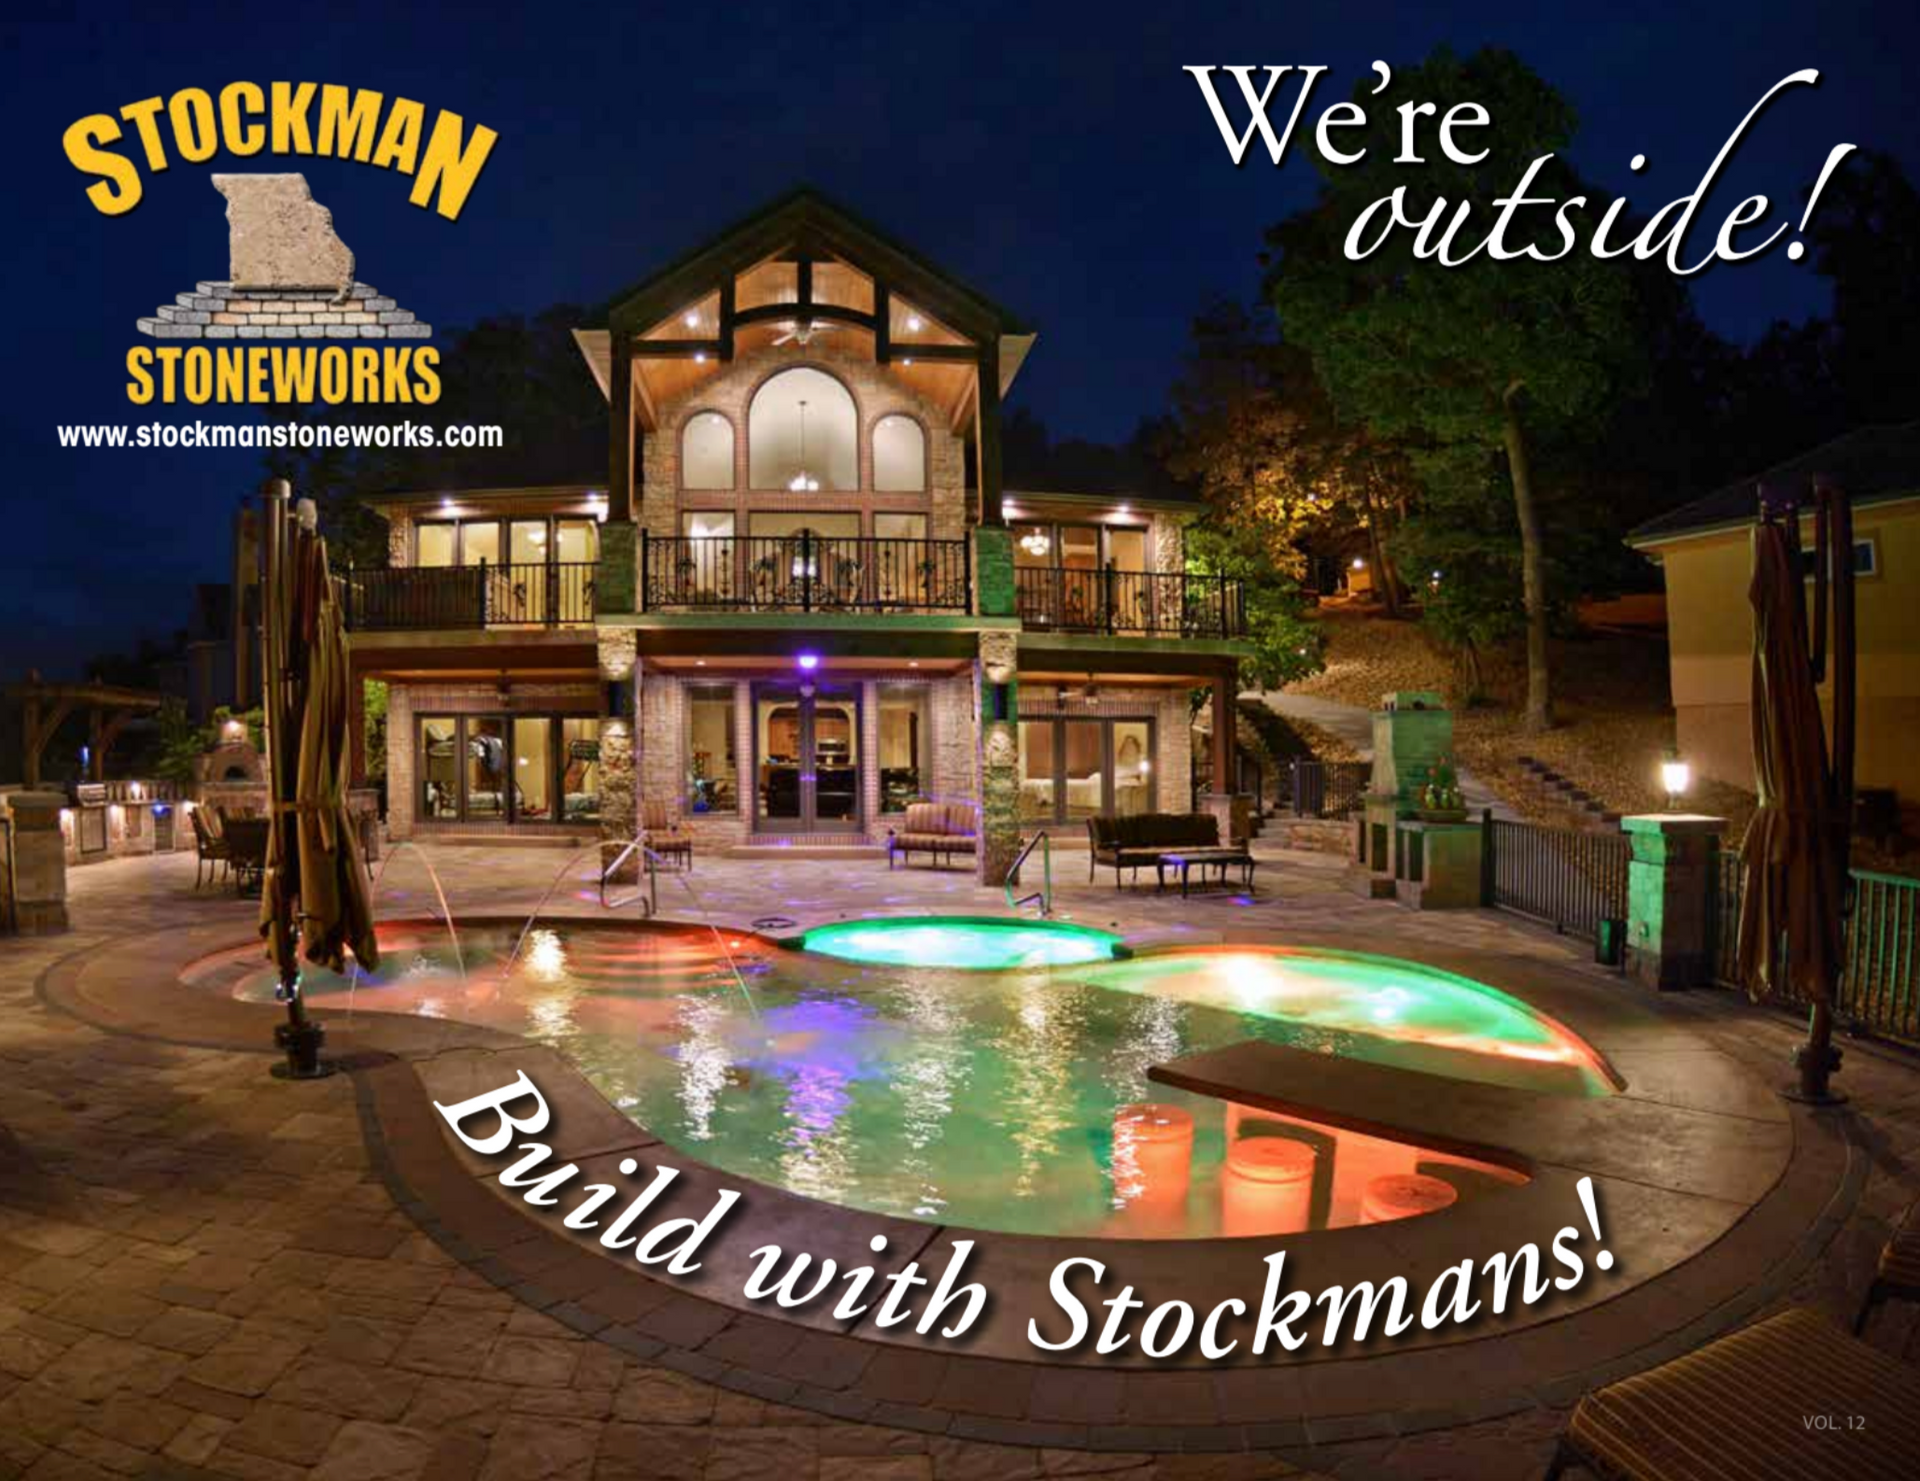 Get Your Stockman Stoneworks Catalog Today! Shop Our Landscaping & Outdoor Products.